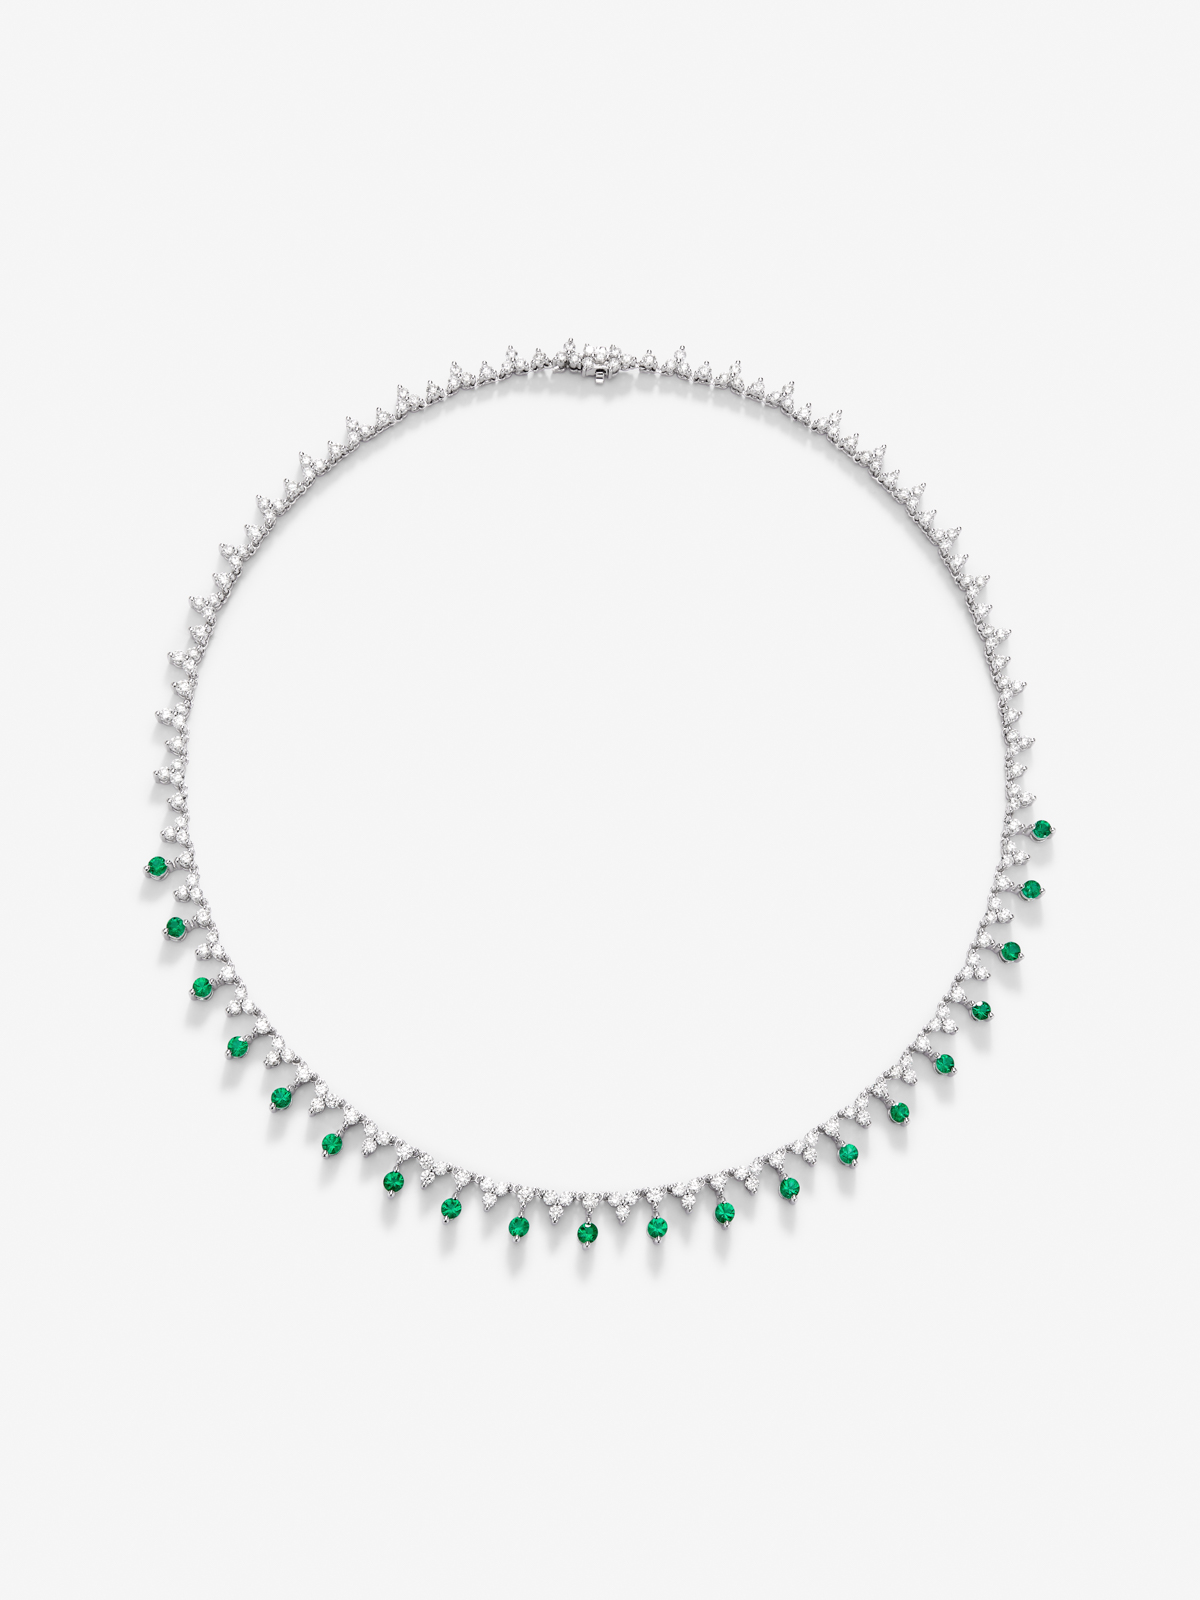 18K White Gold Rivière Necklace with green emeralds in bright size 1.72 cts and white diamonds in 6.53 cts